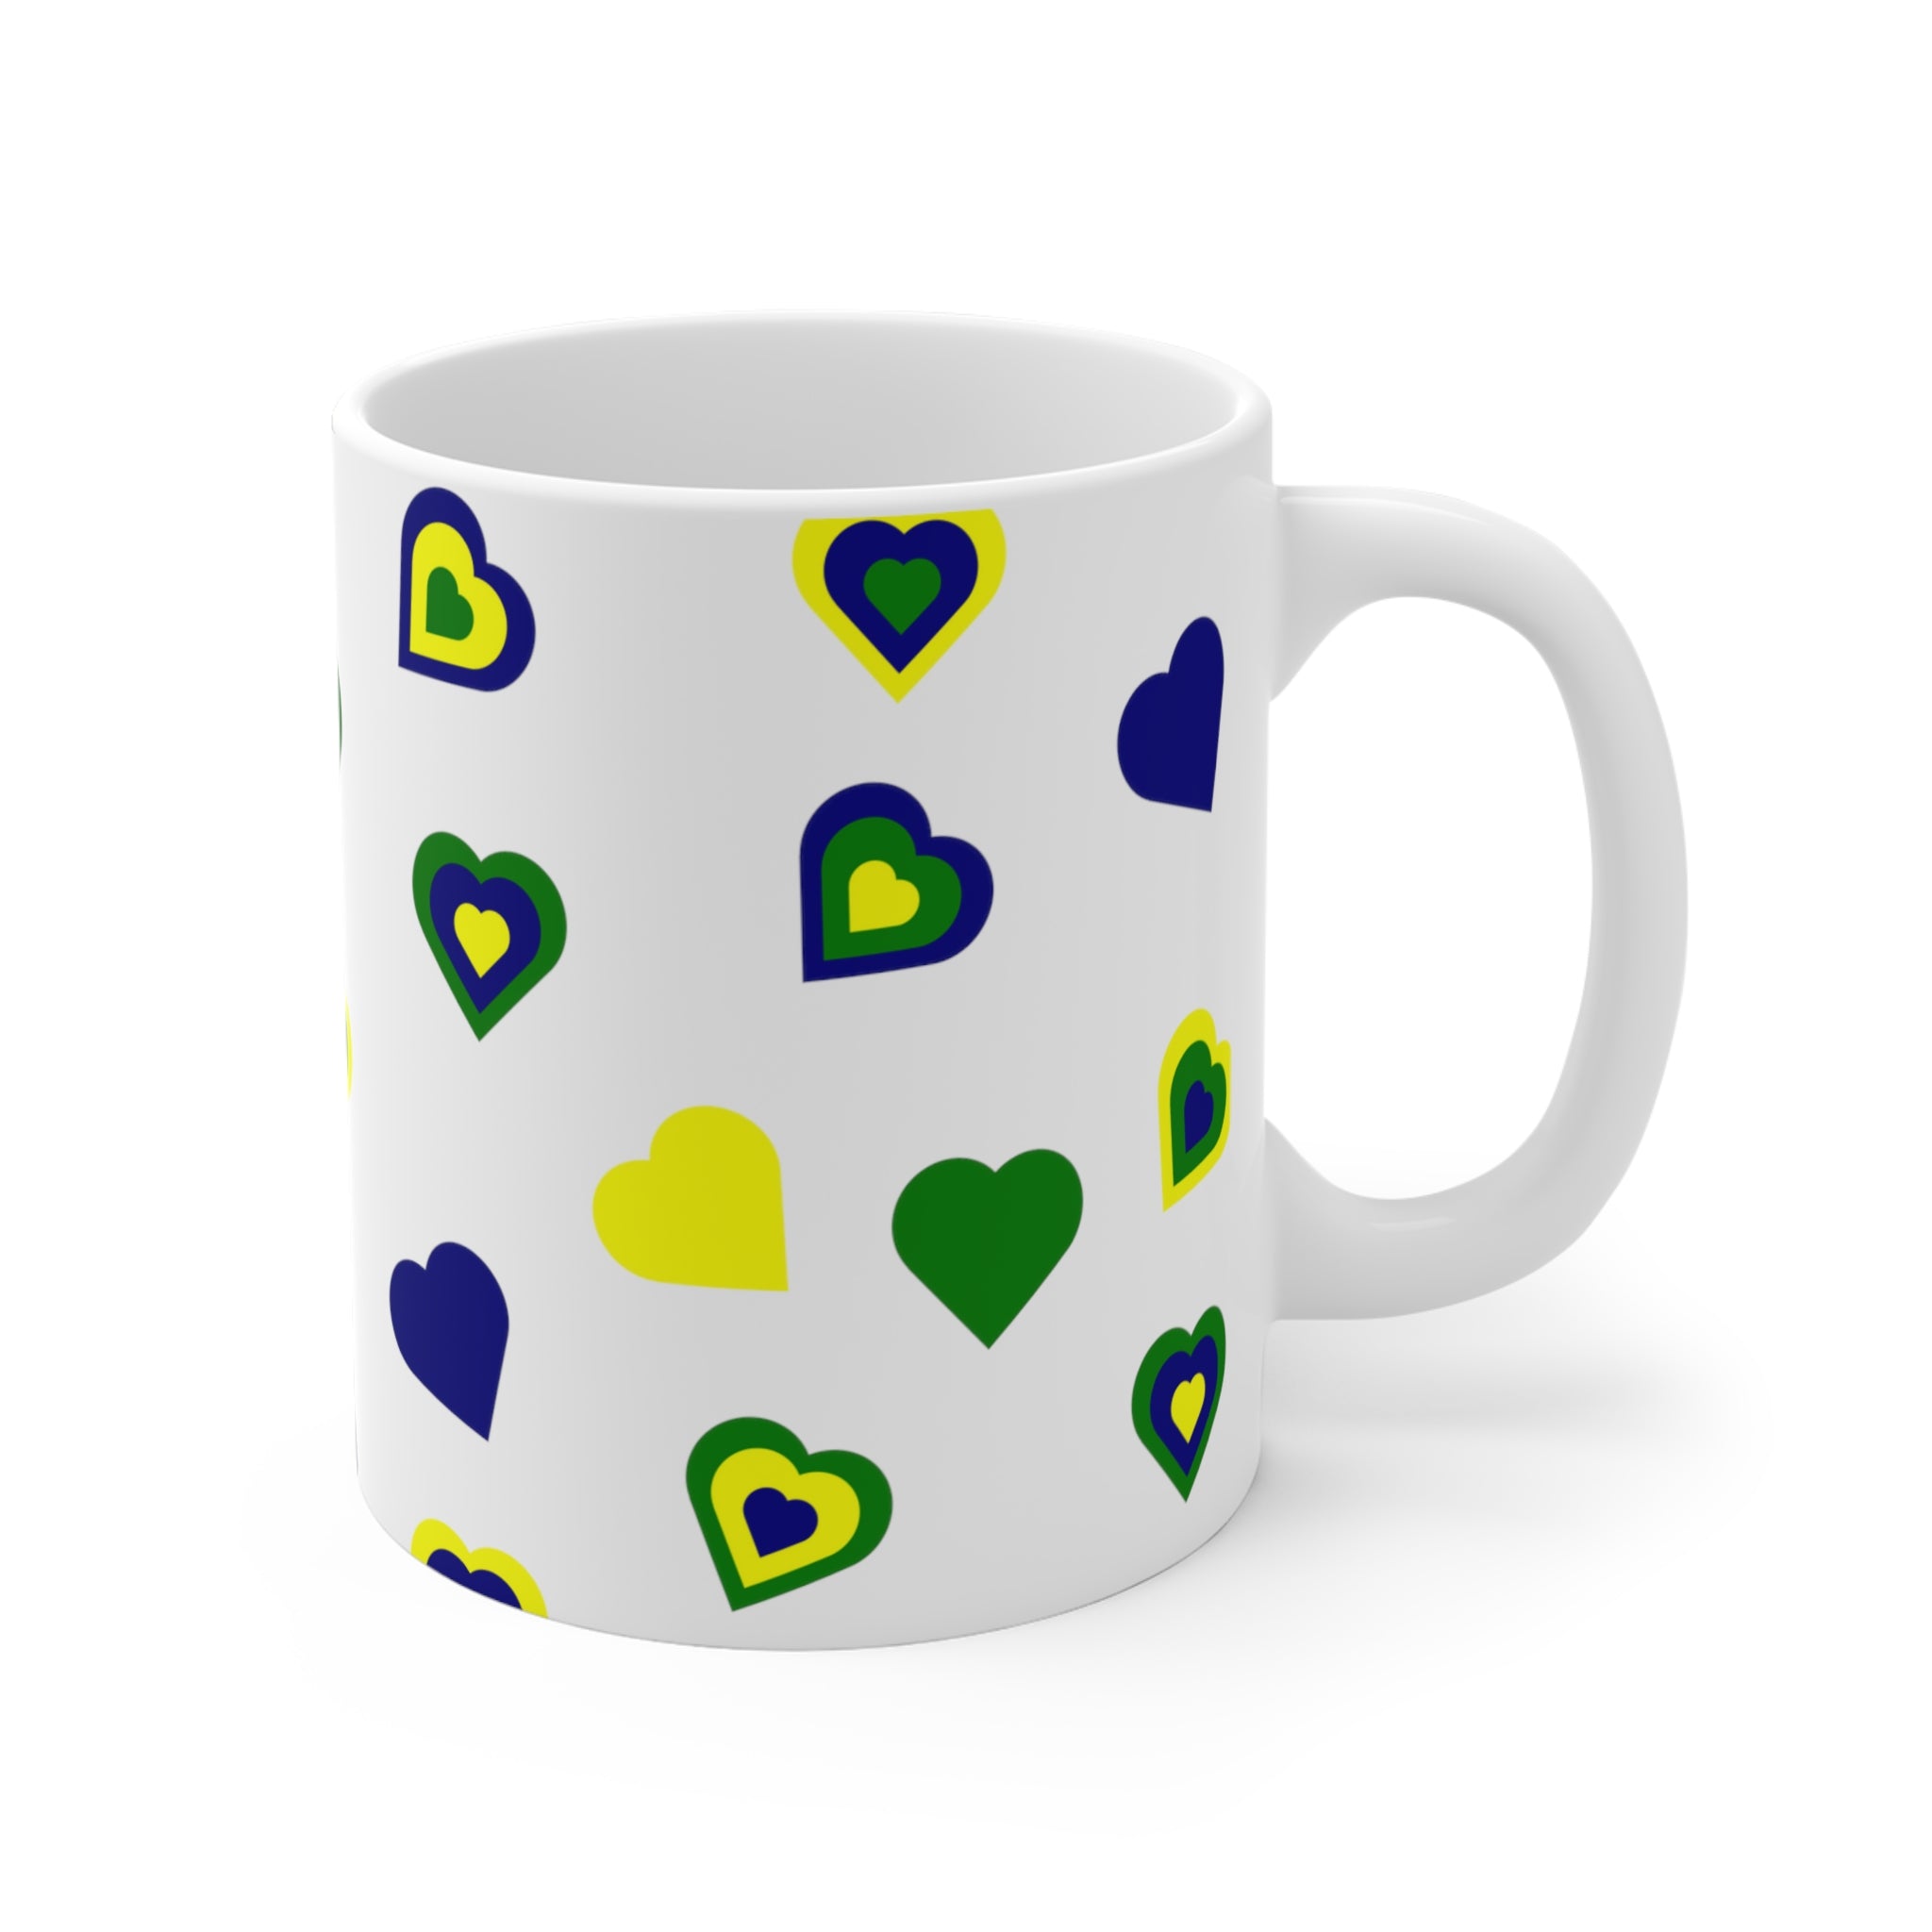 11oz ceramic coffee mug with a design of St. Vincent and the Grenadines' national colored hearts